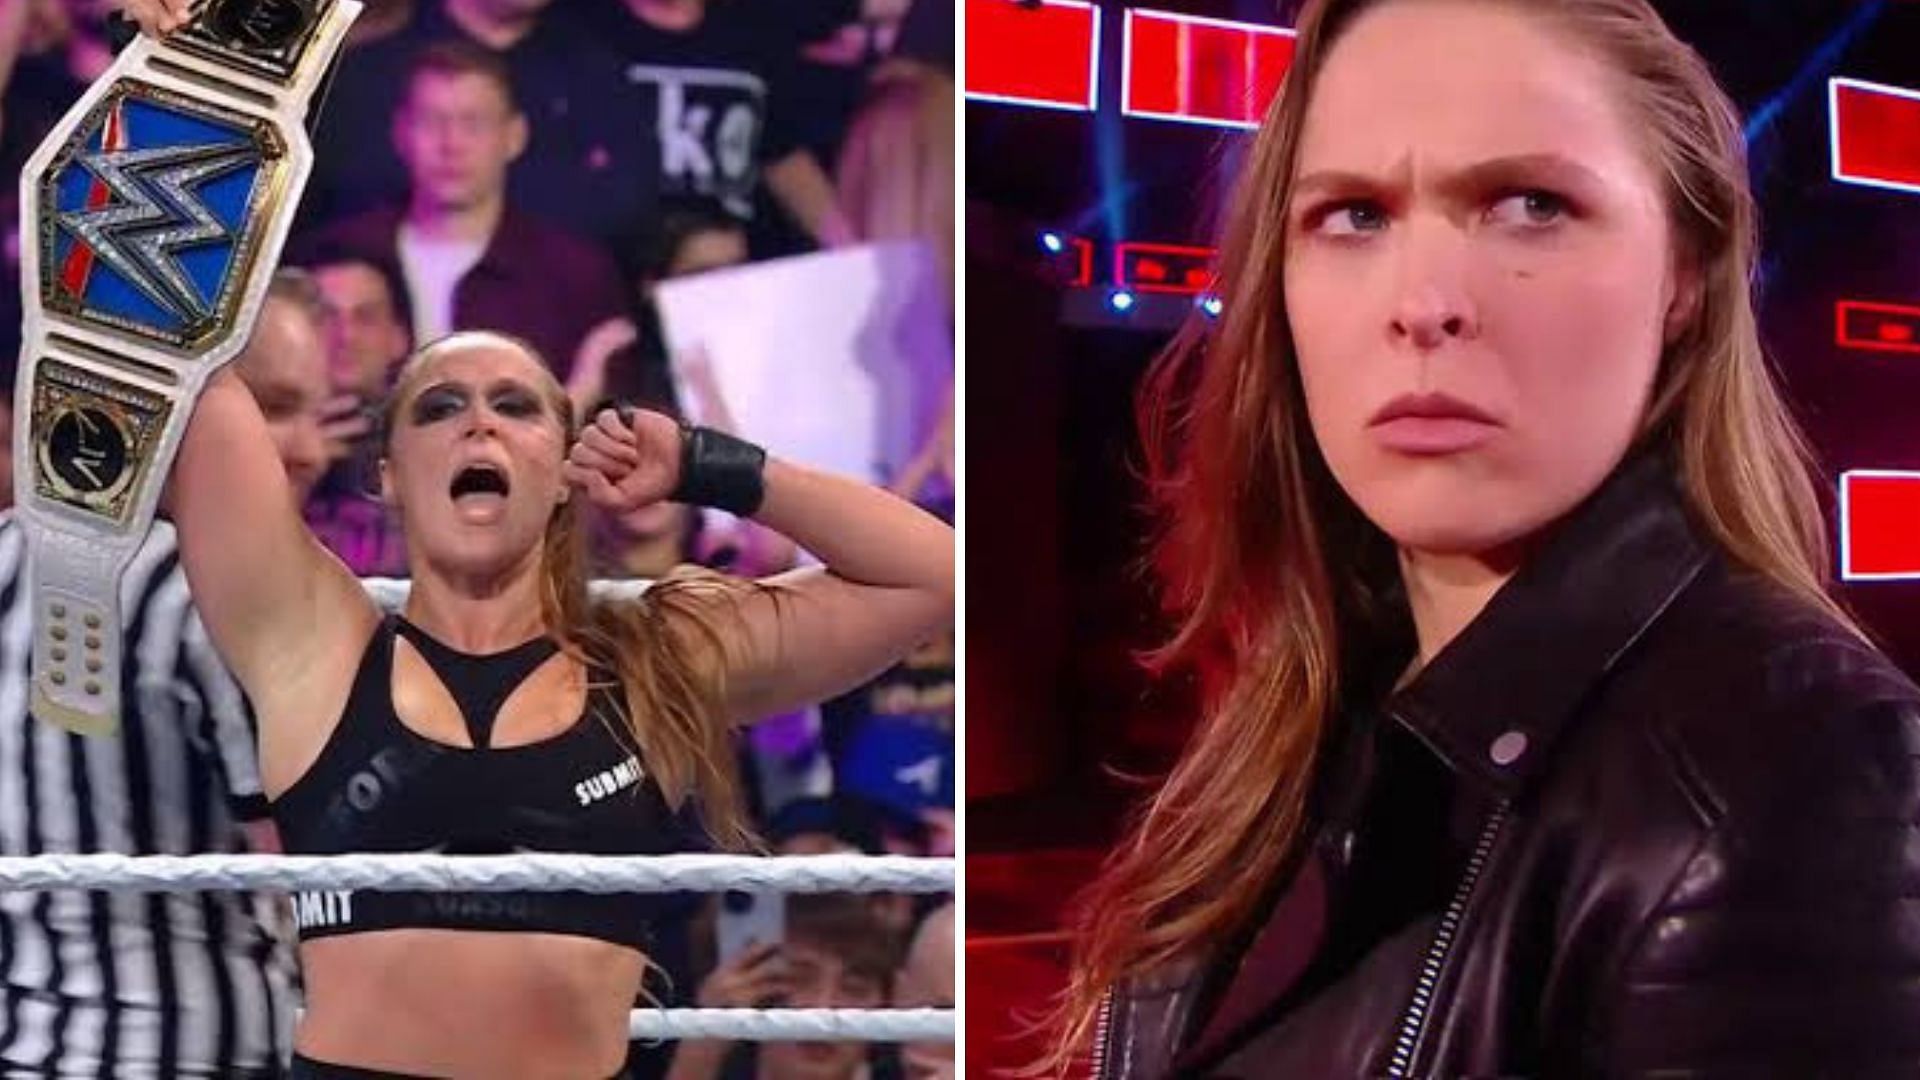 Rousey is one of WWE